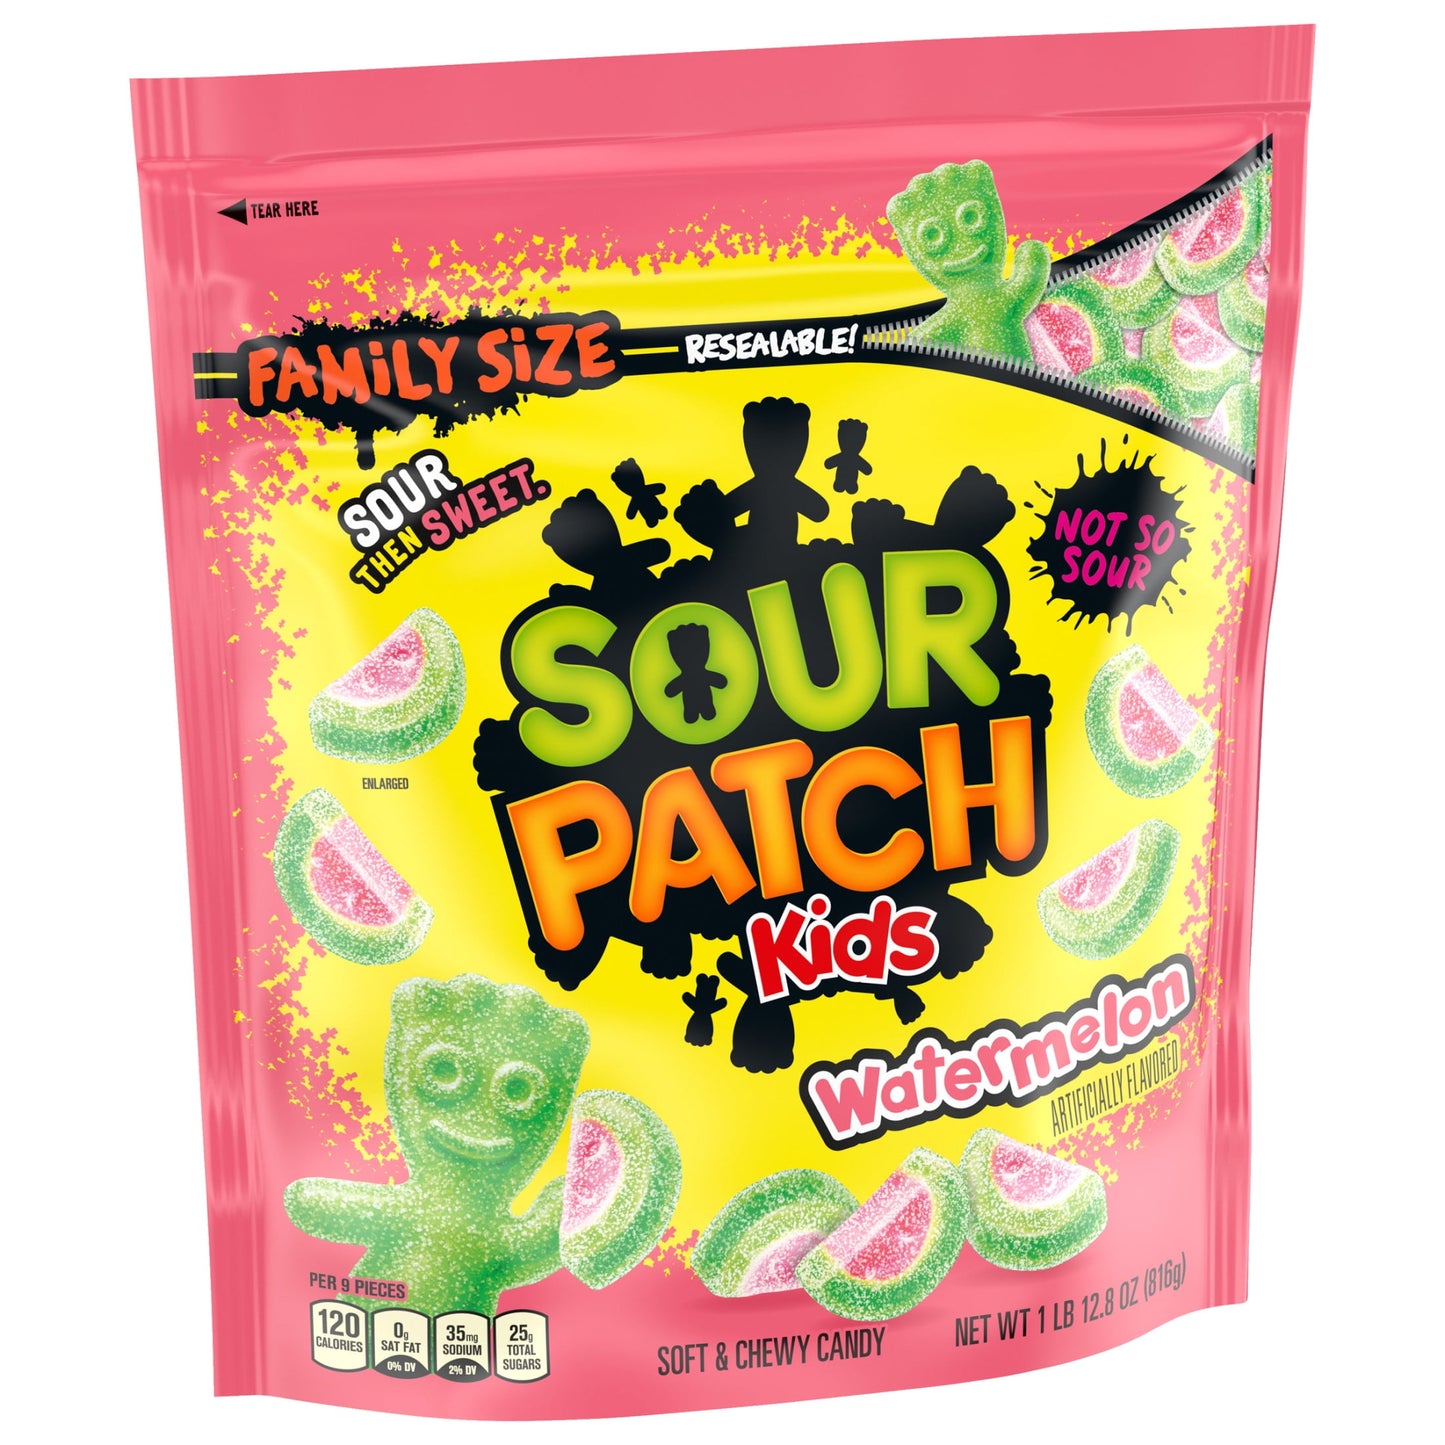 Watermelon Soft & Chewy Candy, Family Size, 1.8 Lb Bag